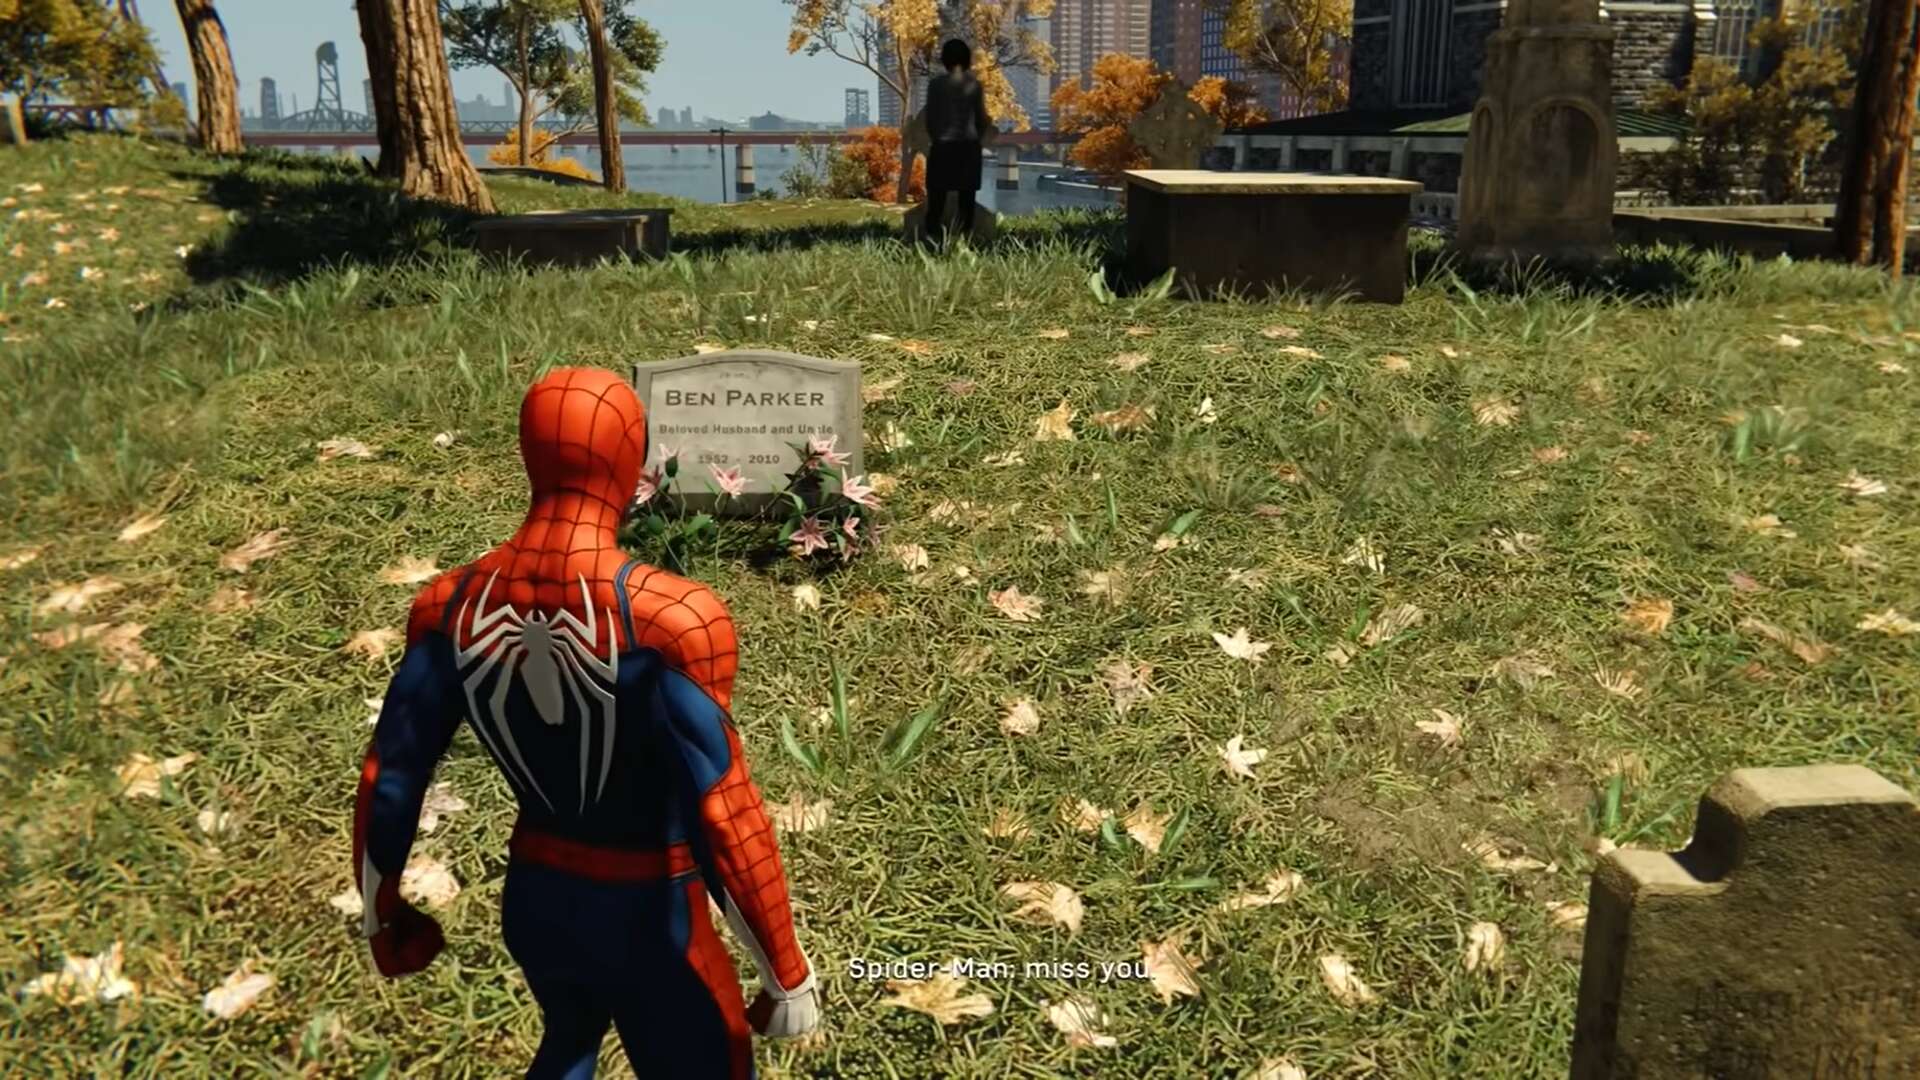 Interacting with different items was one of Marvel Spider-Man's and AAA gaming's underrated feature